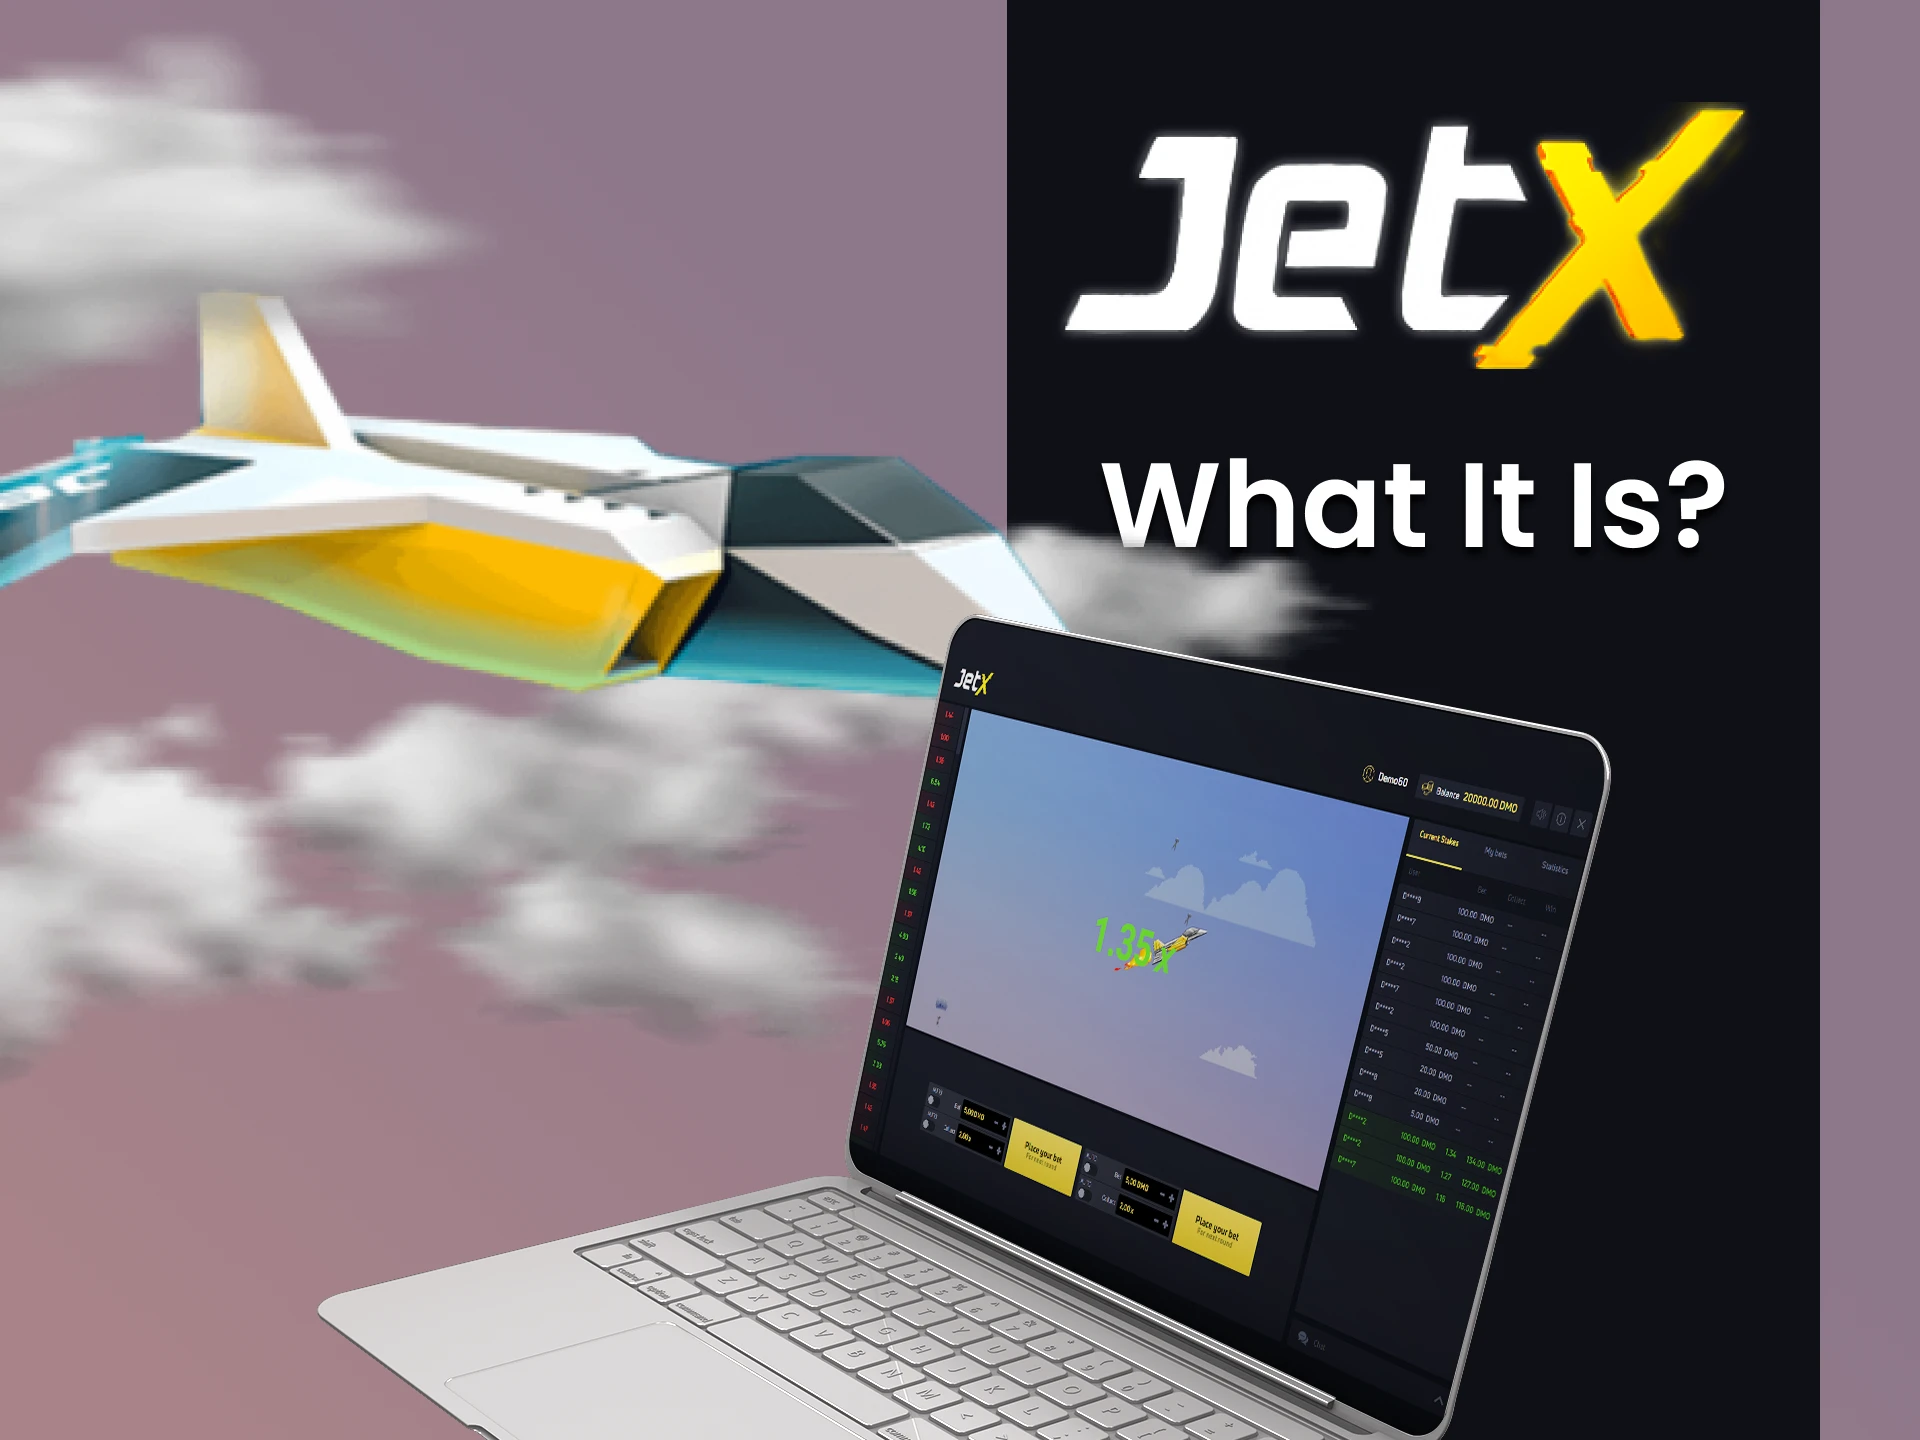 Find out what JetX is.